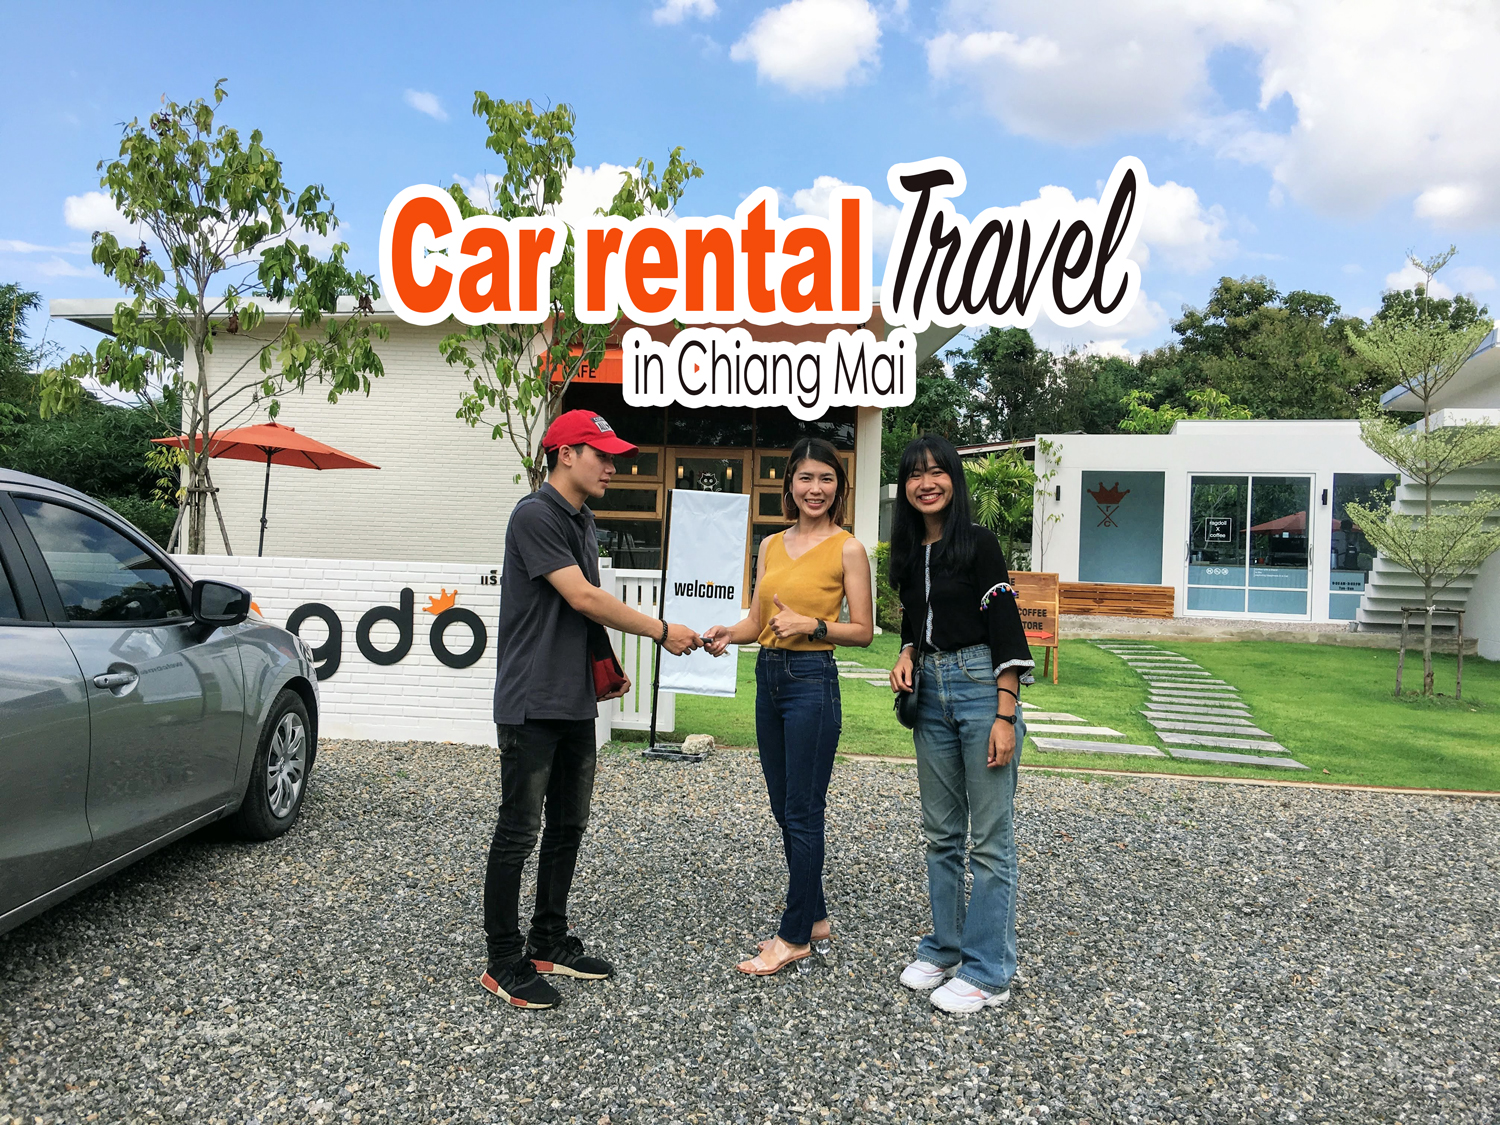 Car Rental Travel in Chiang Mai, 24 hours booking, No deposit required!